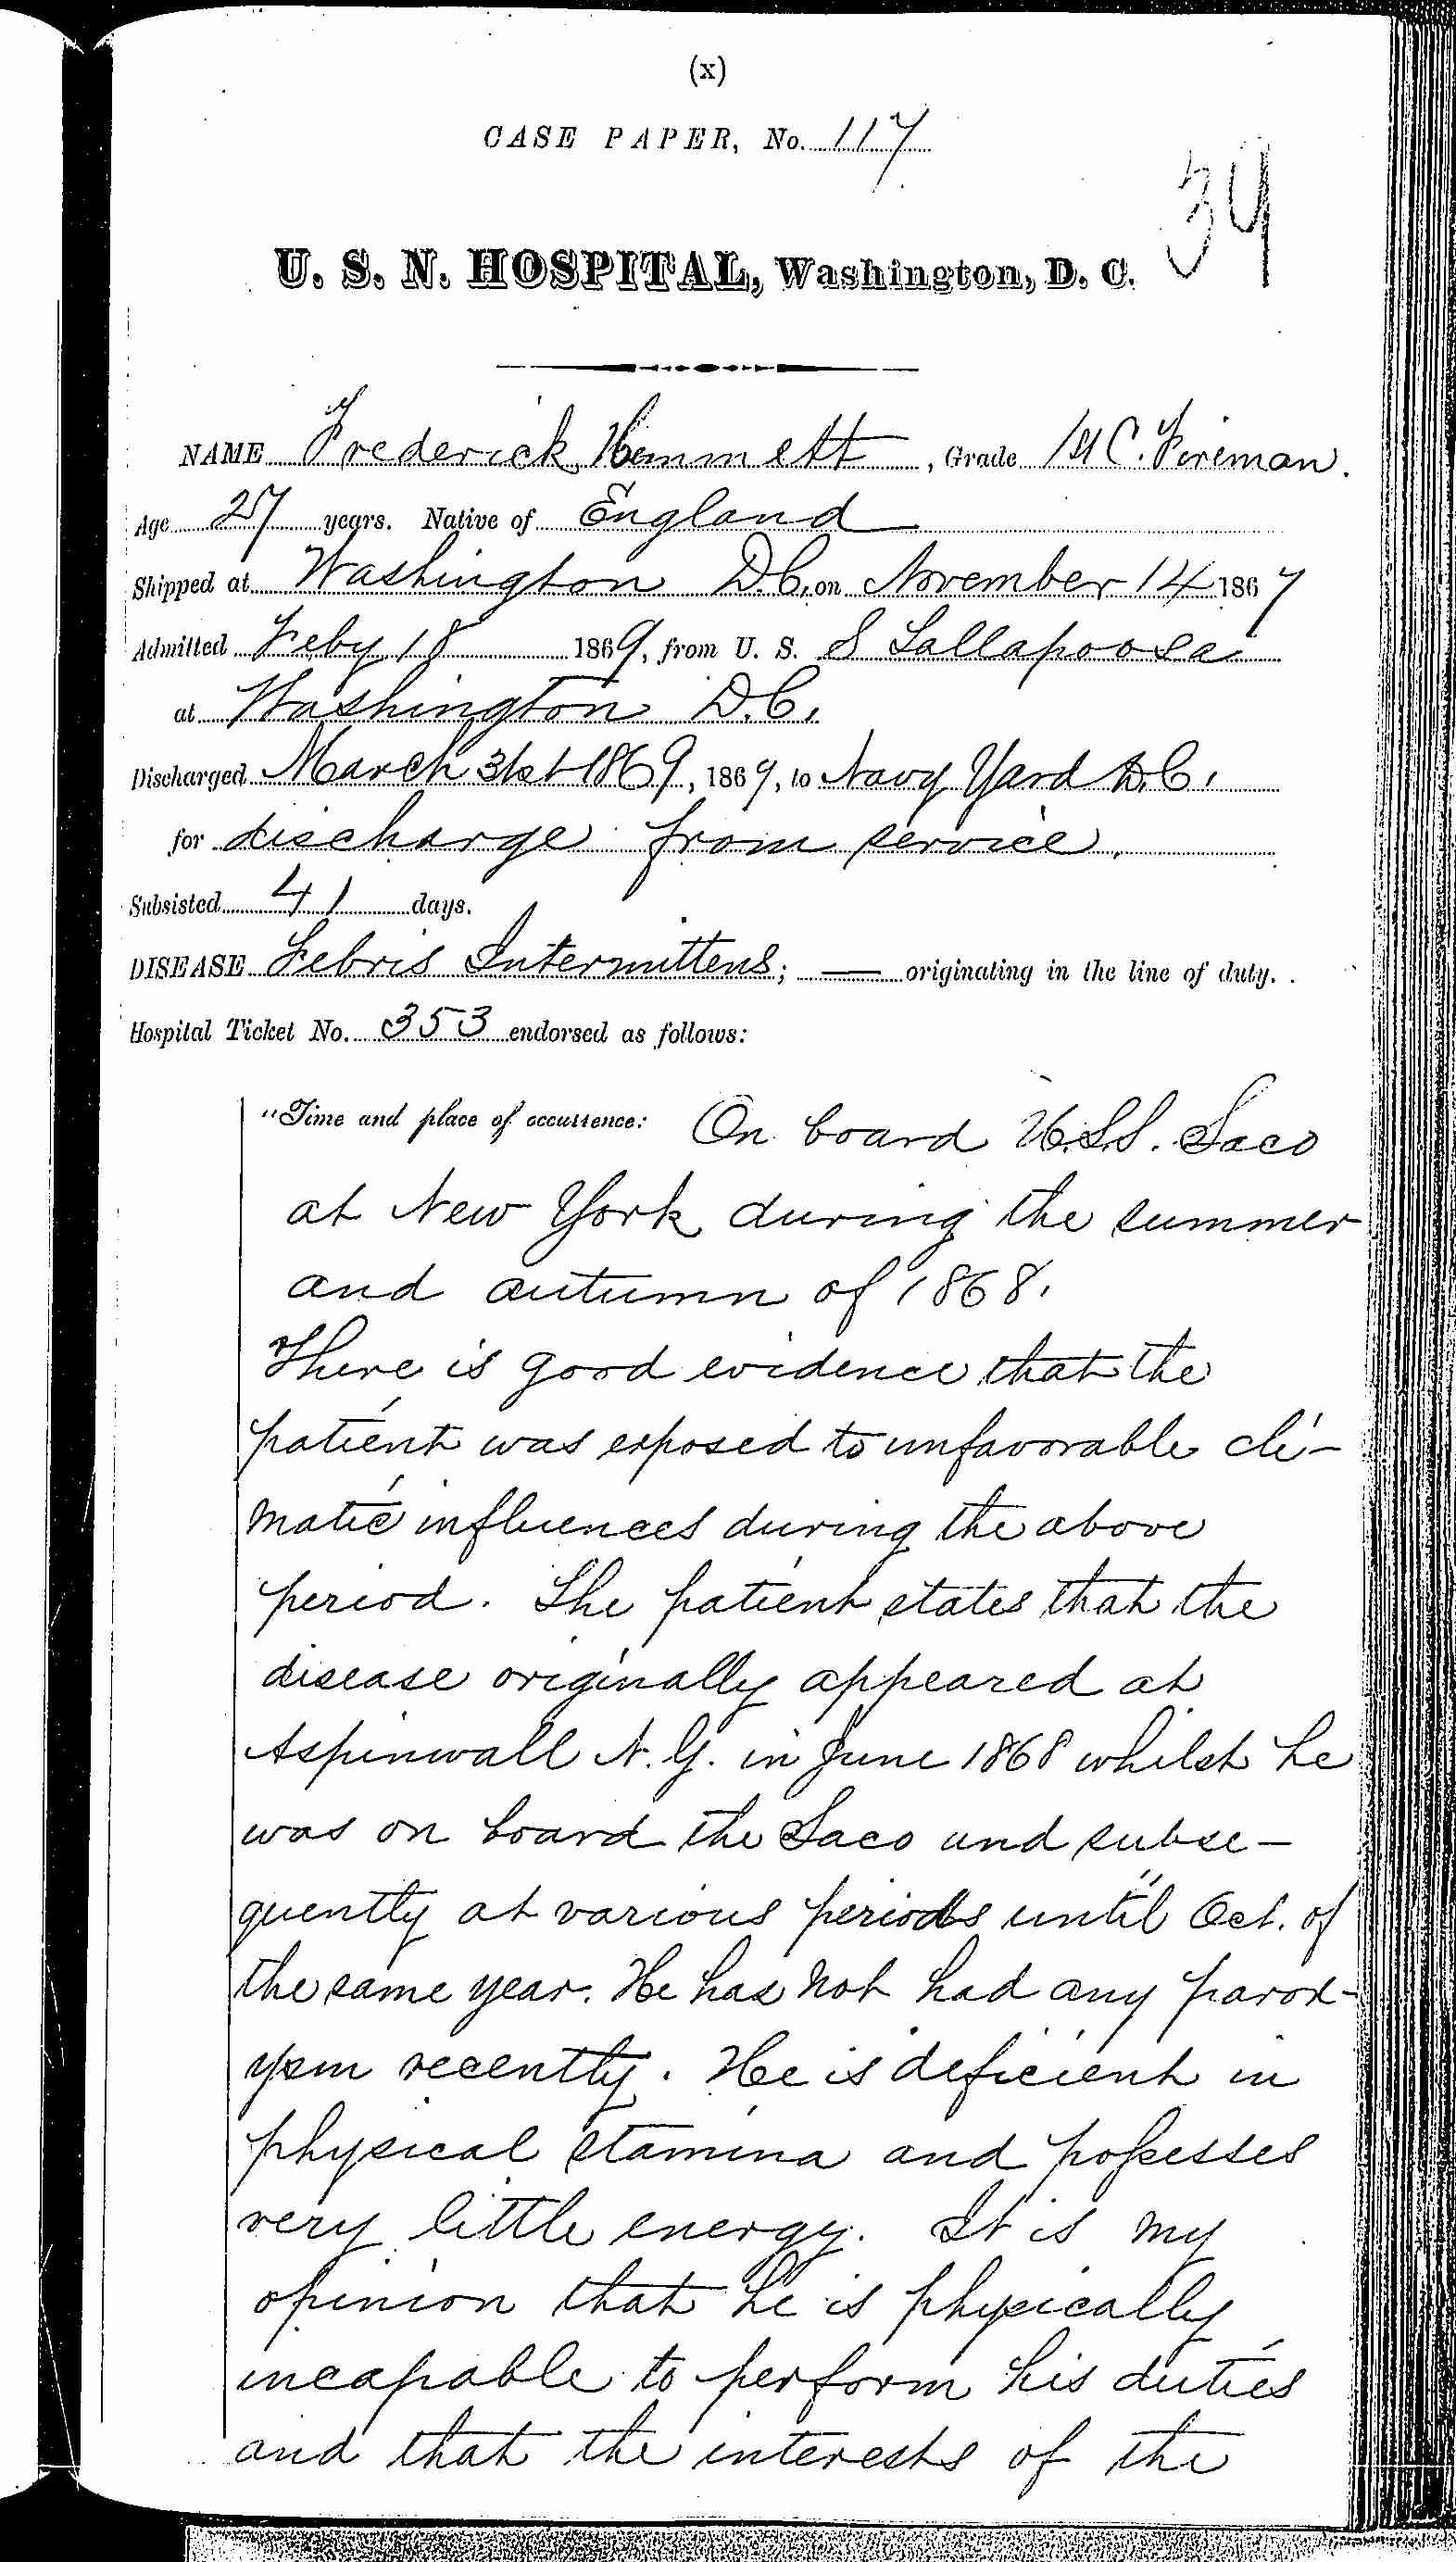 Entry for Frederick Hammett (page 1 of 5) in the log Hospital Tickets and Case Papers - Naval Hospital - Washington, D.C. - 1868-69